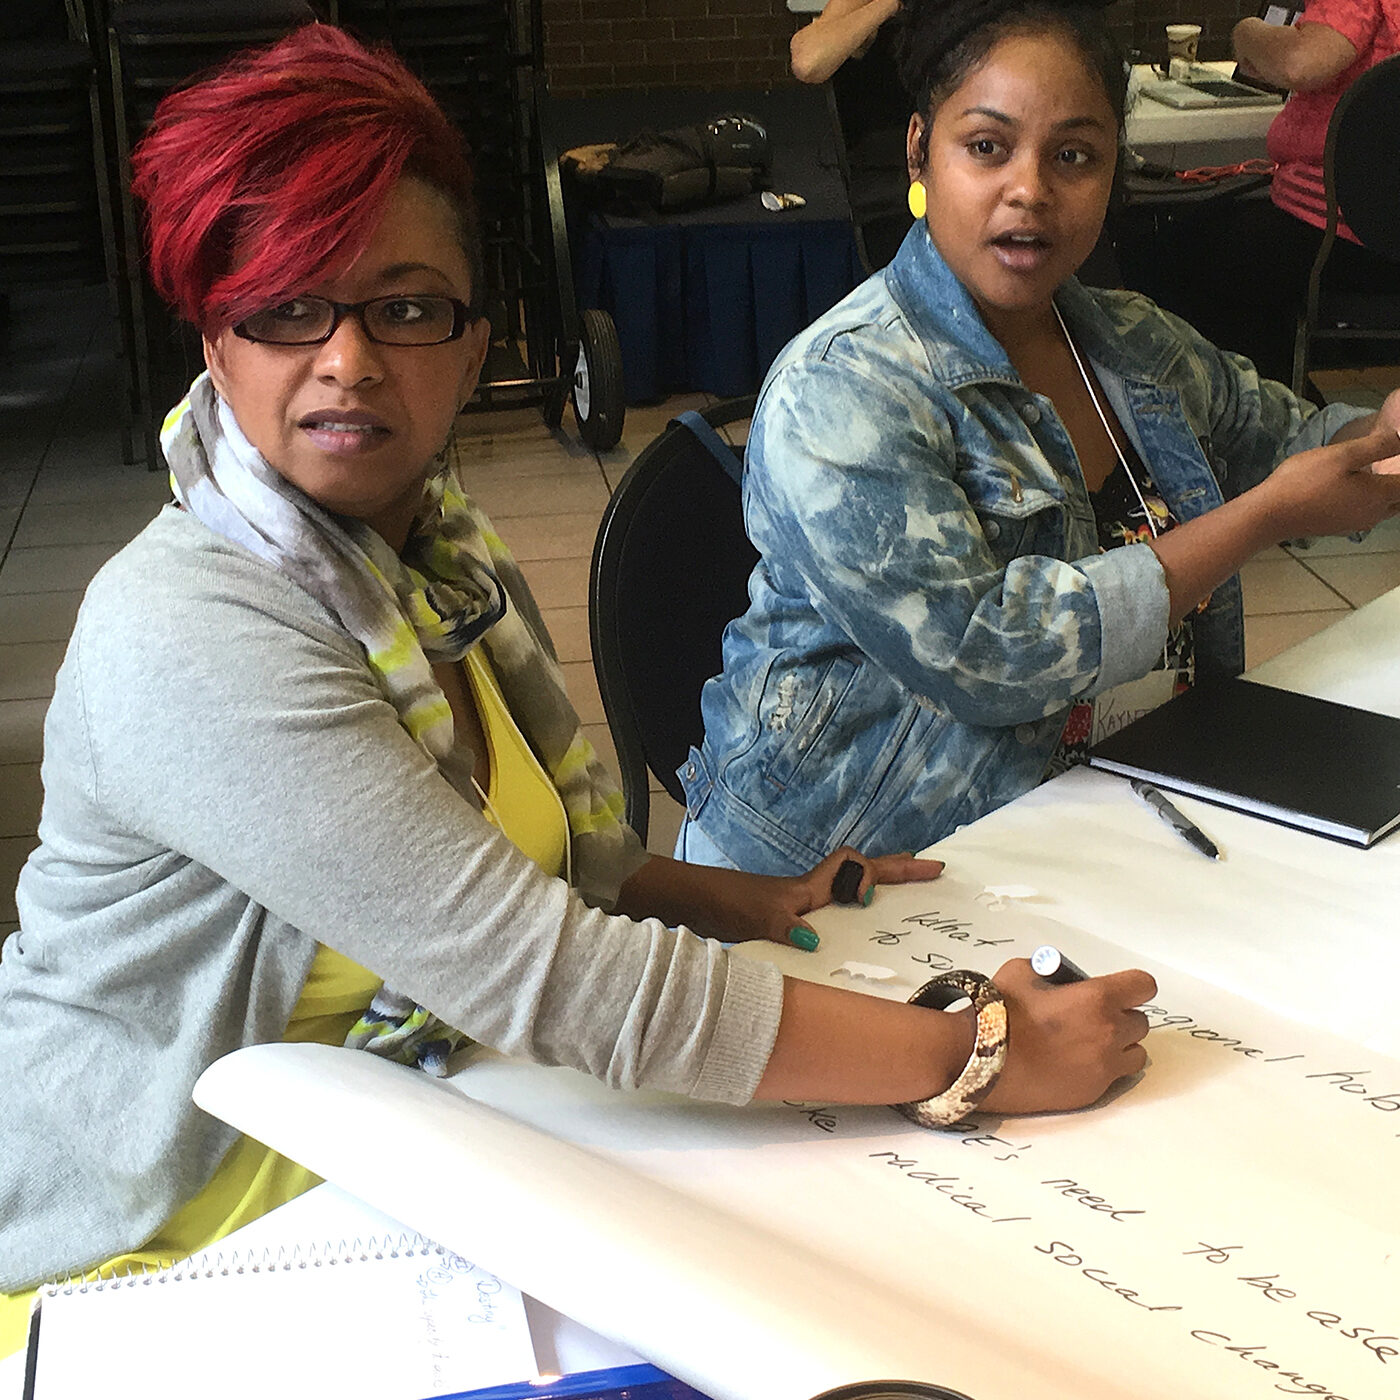 Two Black women are seated at a table, with a piece of flip-chart paper in front of them, both looking off-camera to the left. The woman on the right looks like she’s speaking; she’s wearing a blue denim jacket, yellow earrings, and her hair is pulled back. She’s gesturing as she speaks. The woman on the right is writing on the flip-chart paper; she’s wearing a grey cardigan over a yellow top. Her short red hair is swept to the side and she is wearing glasses.